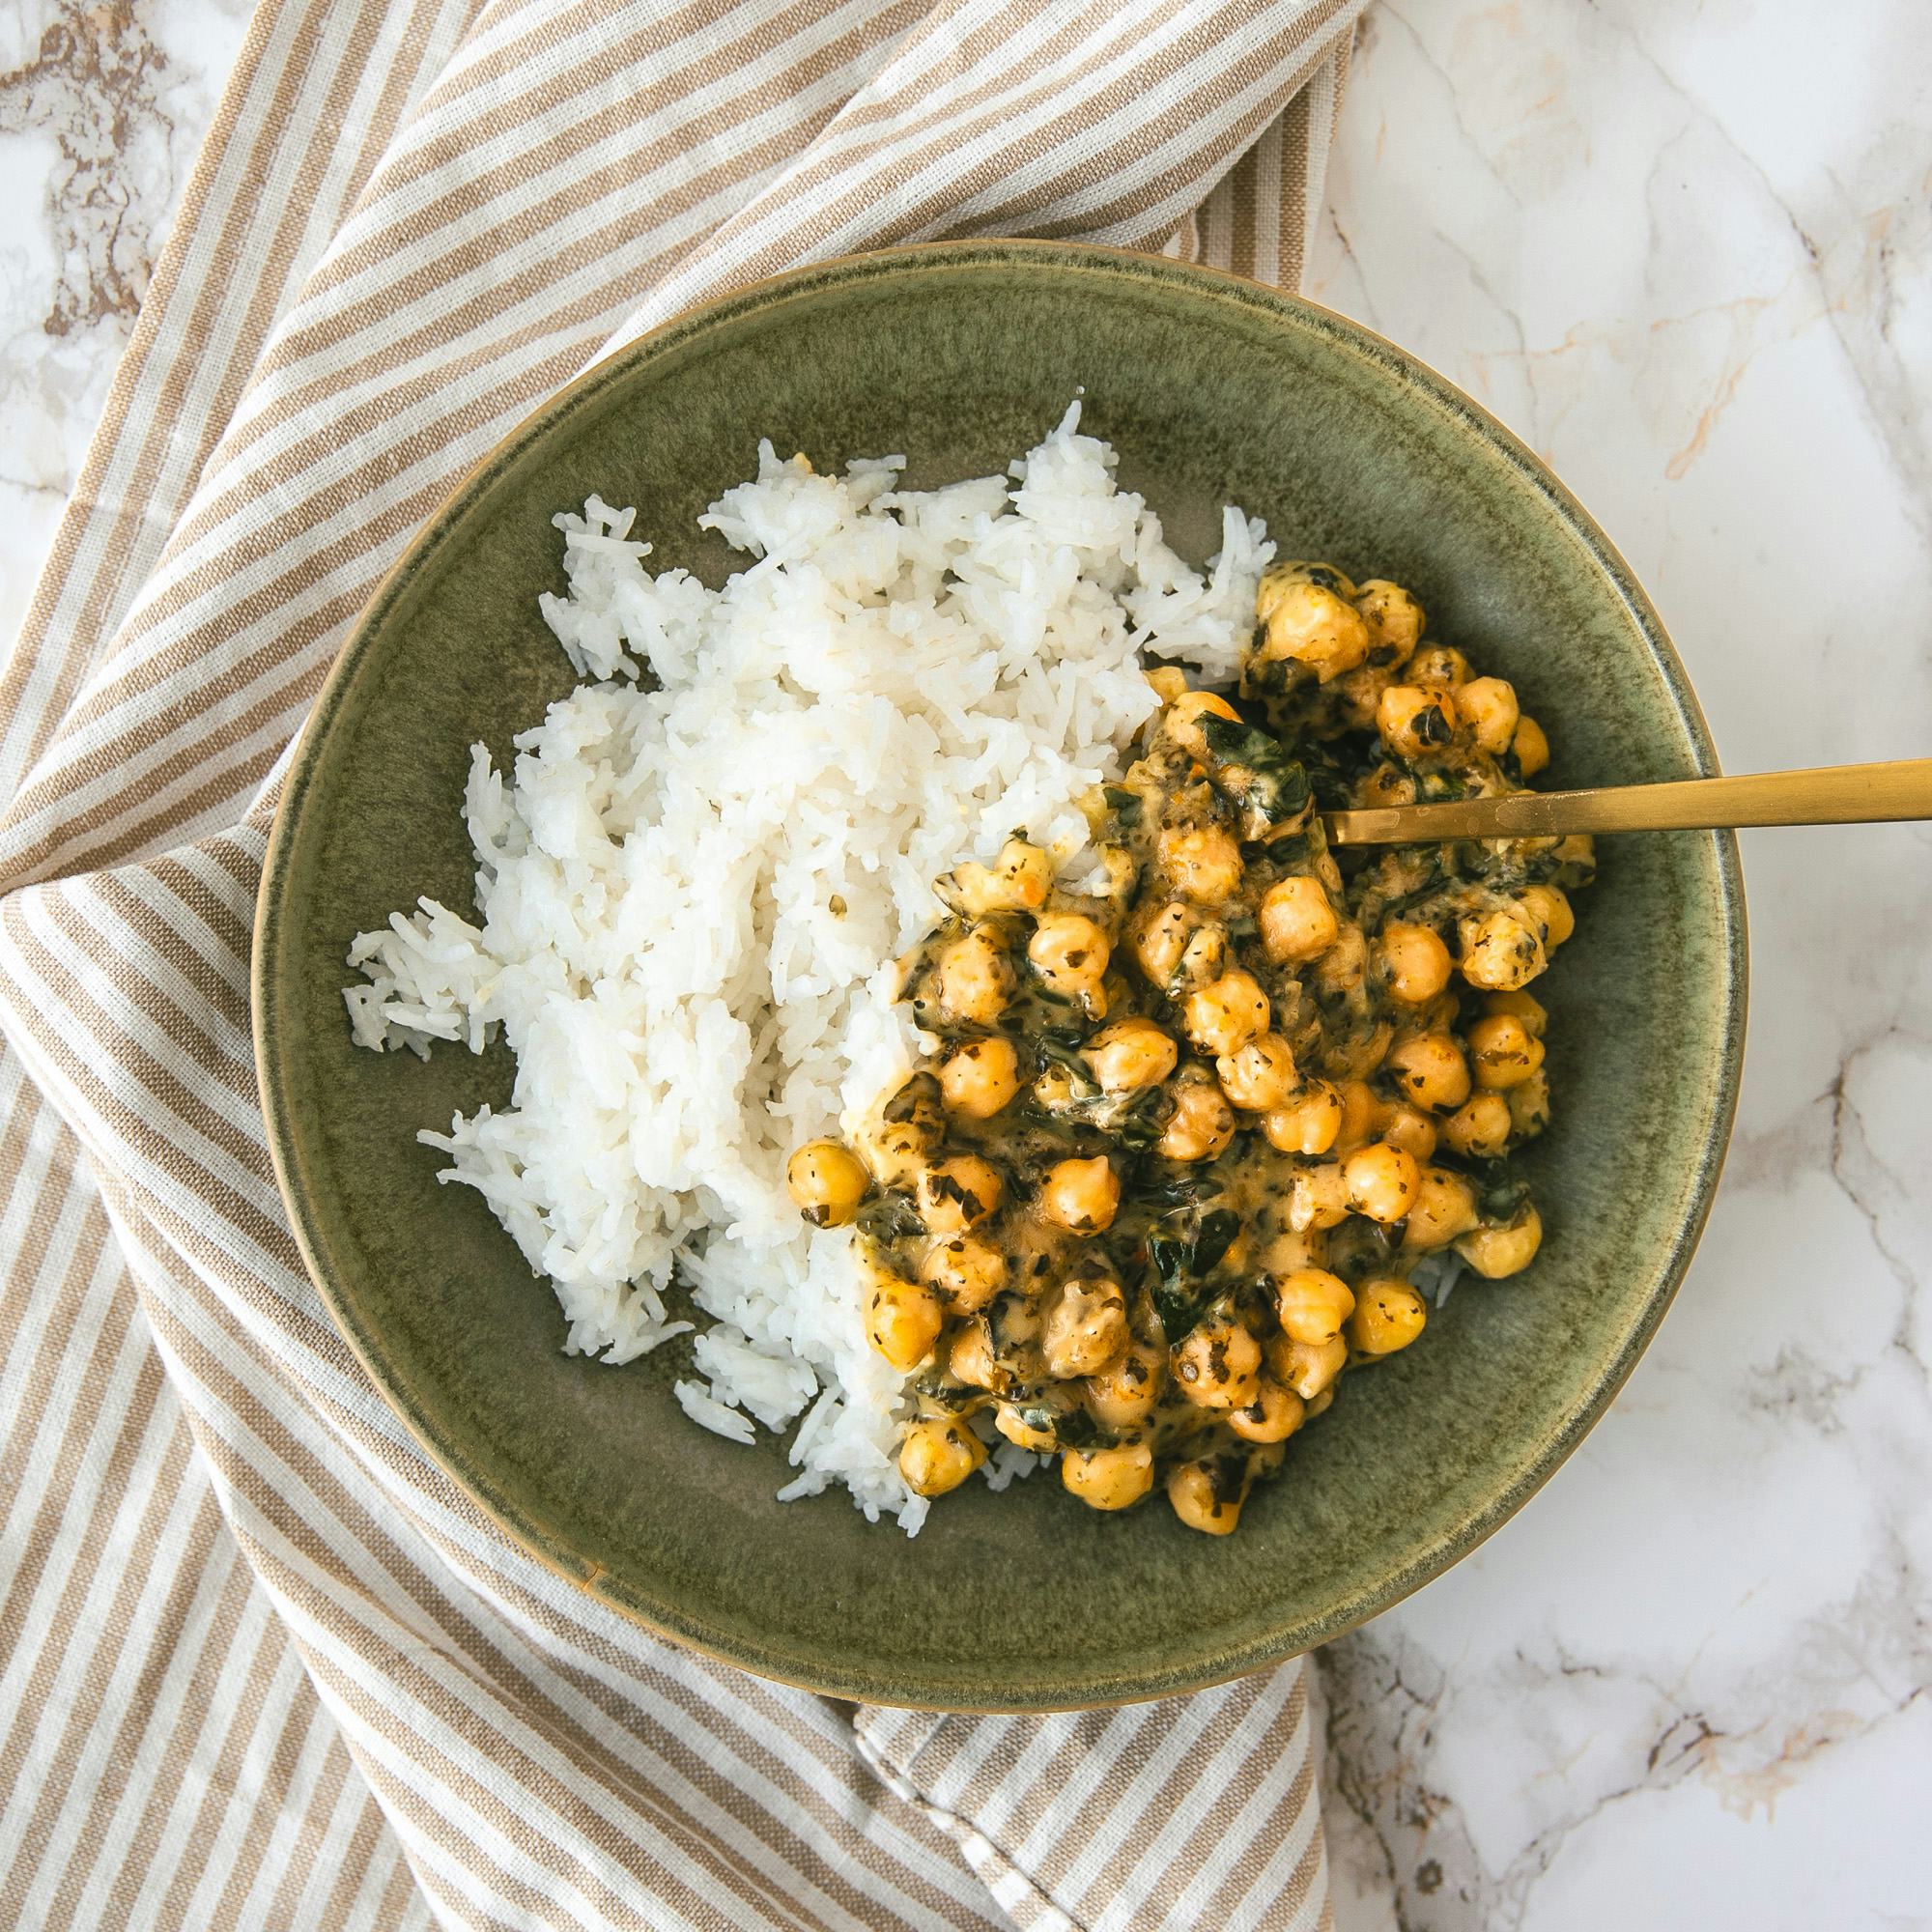 Creamy Orange Sauce With Chickpeas and Spinach